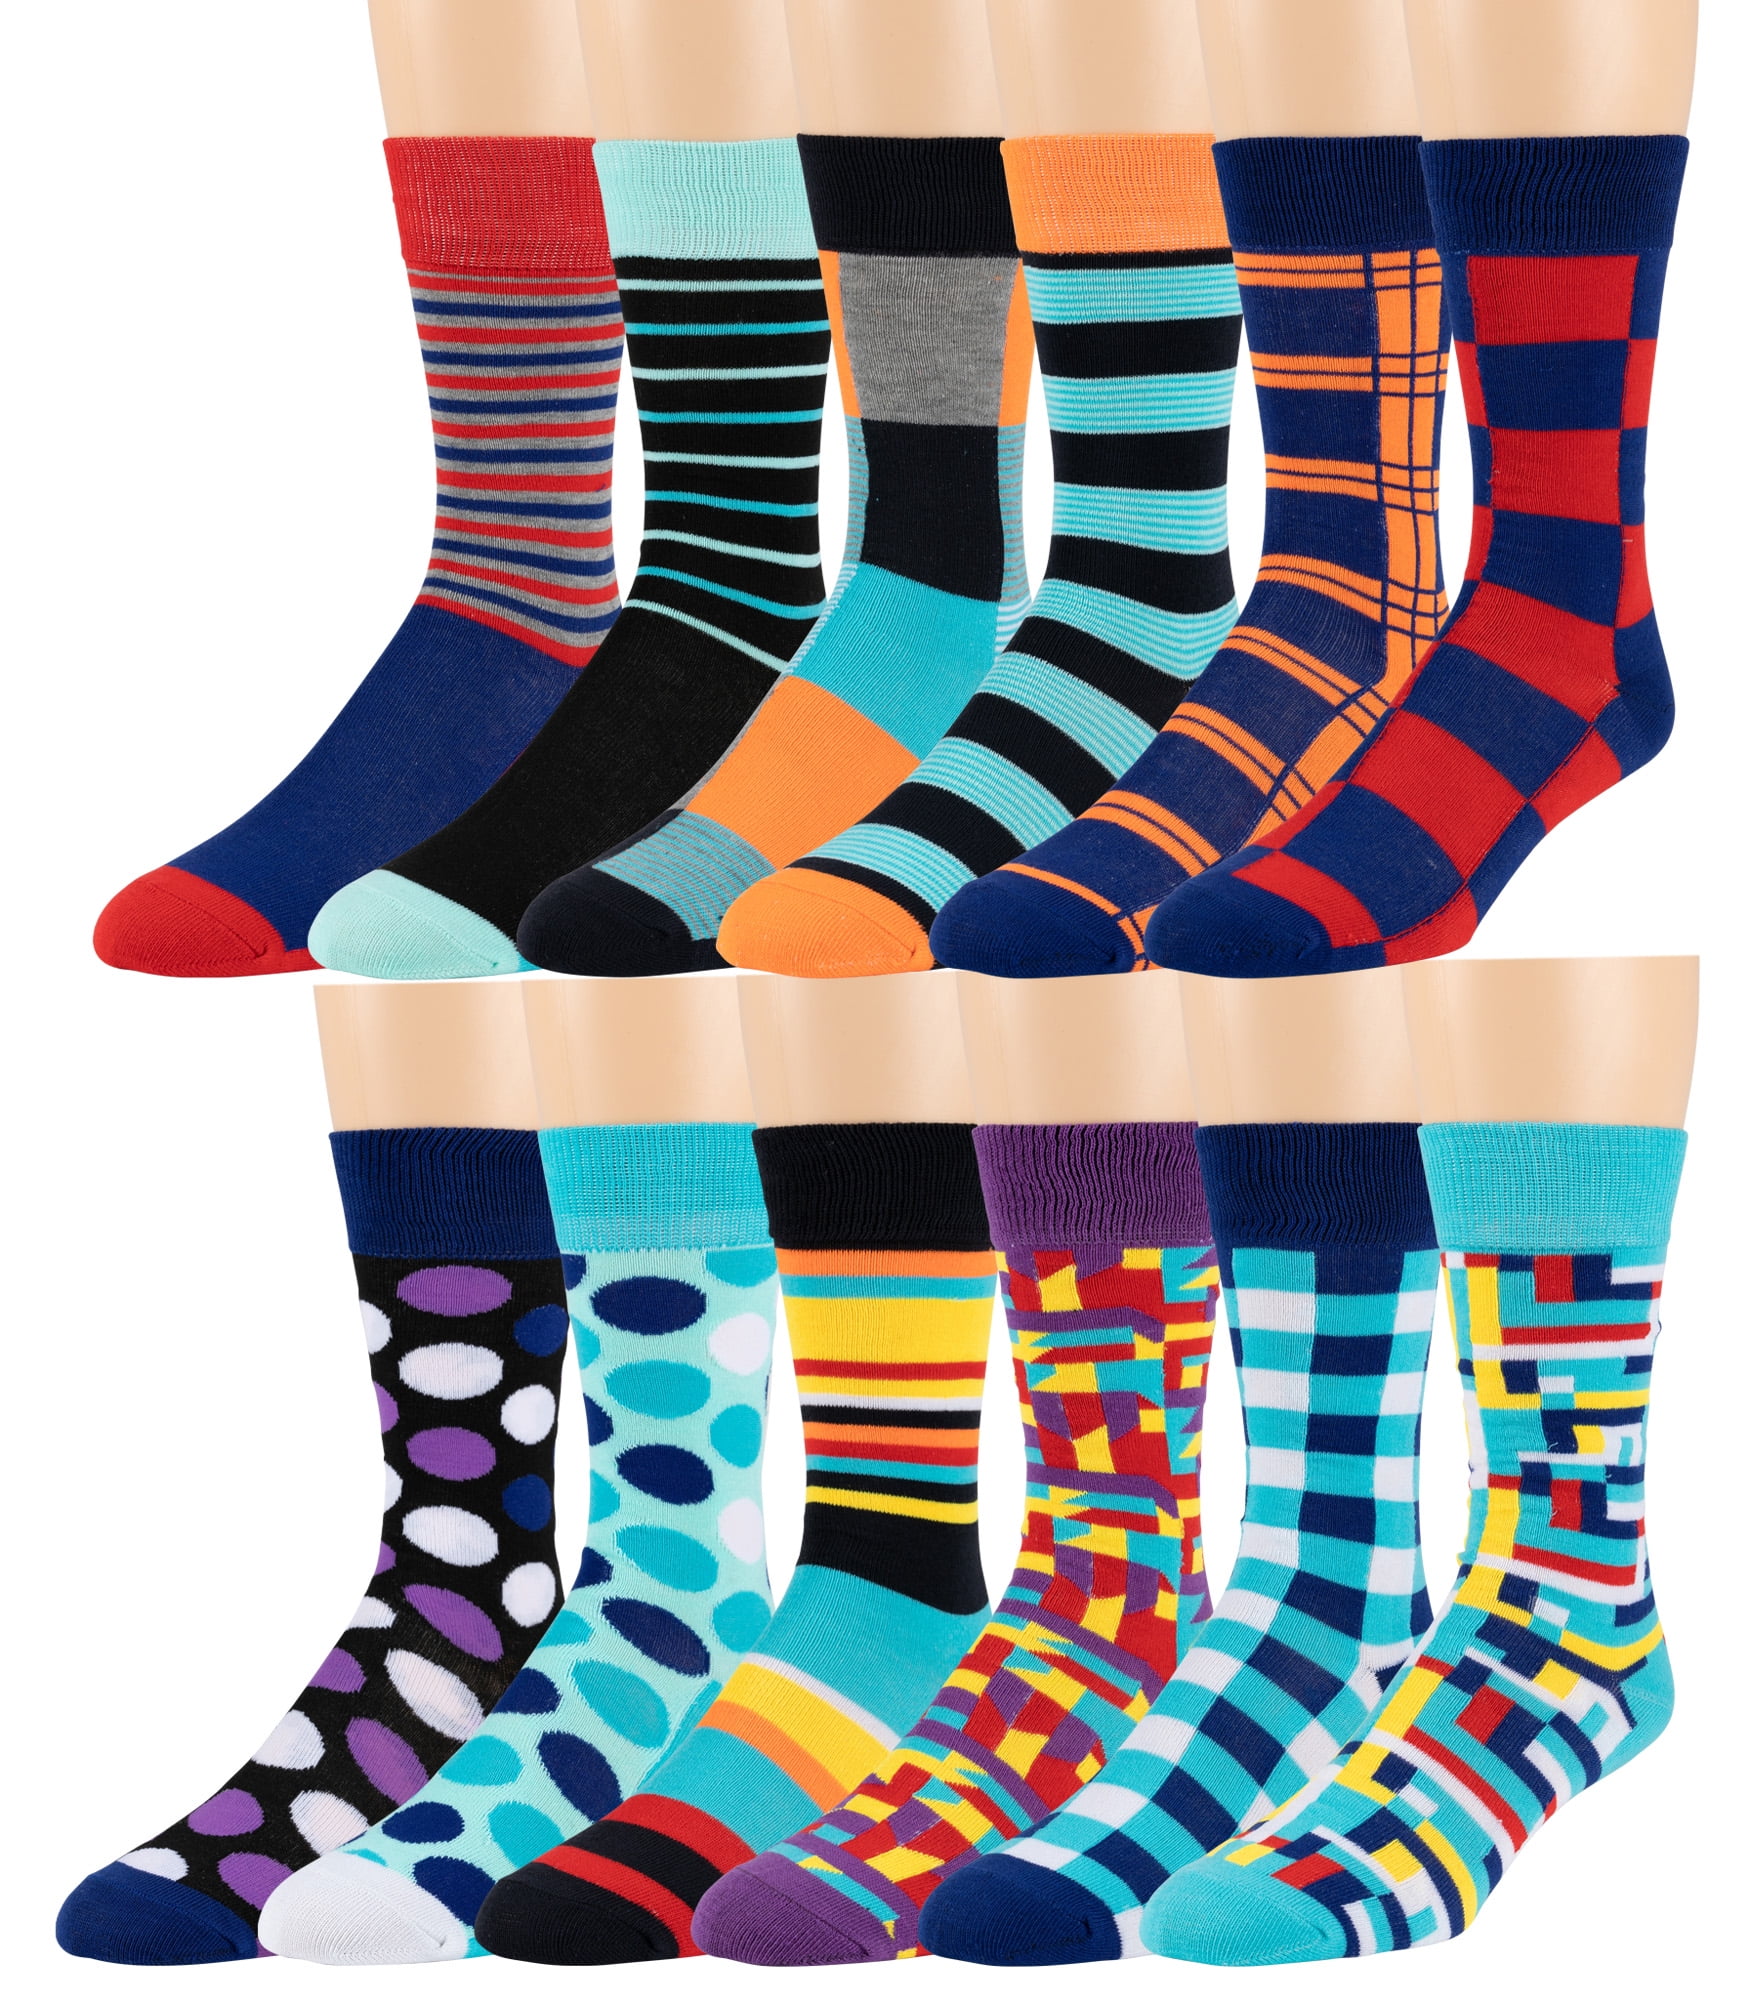 Mens Pattern Dress Funky Fun Colorful Socks 12 Assorted Patterns Size